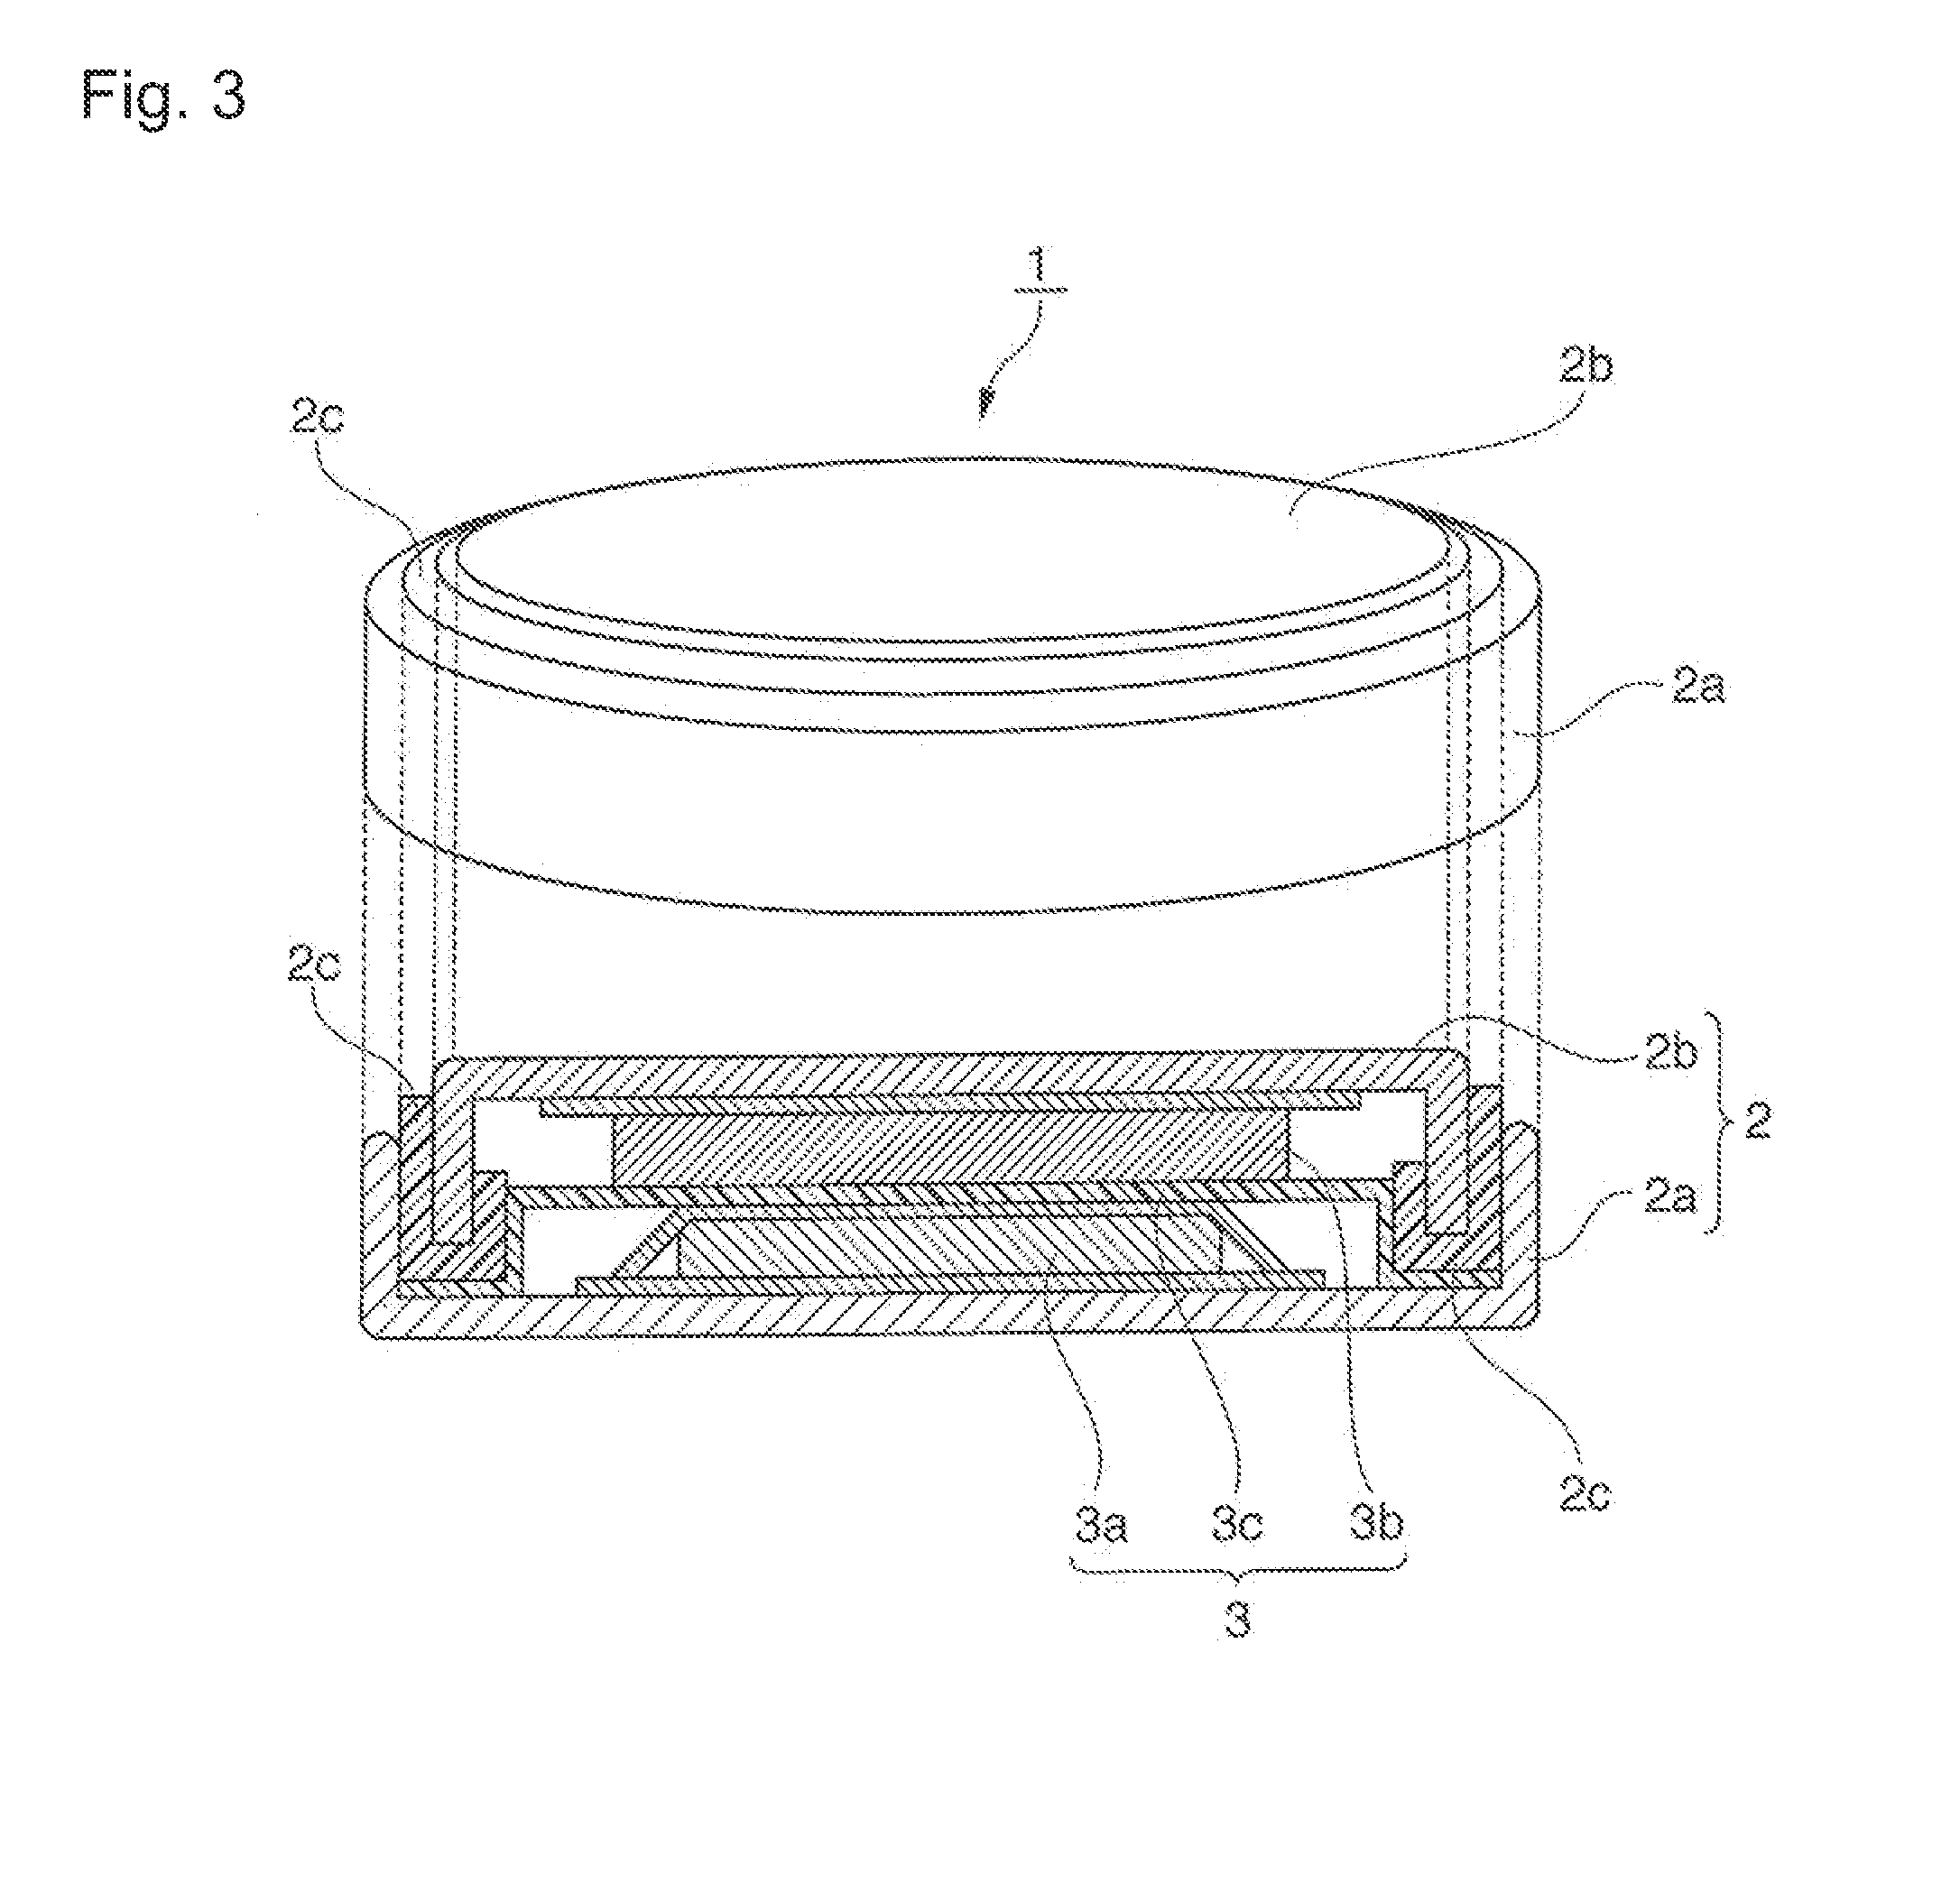 Positive electrode active material for nonaqueous electrolyte secondary batteries, method for manufacturing the same, and nonaqueous electrolyte secondary battery using said positive electrode active material